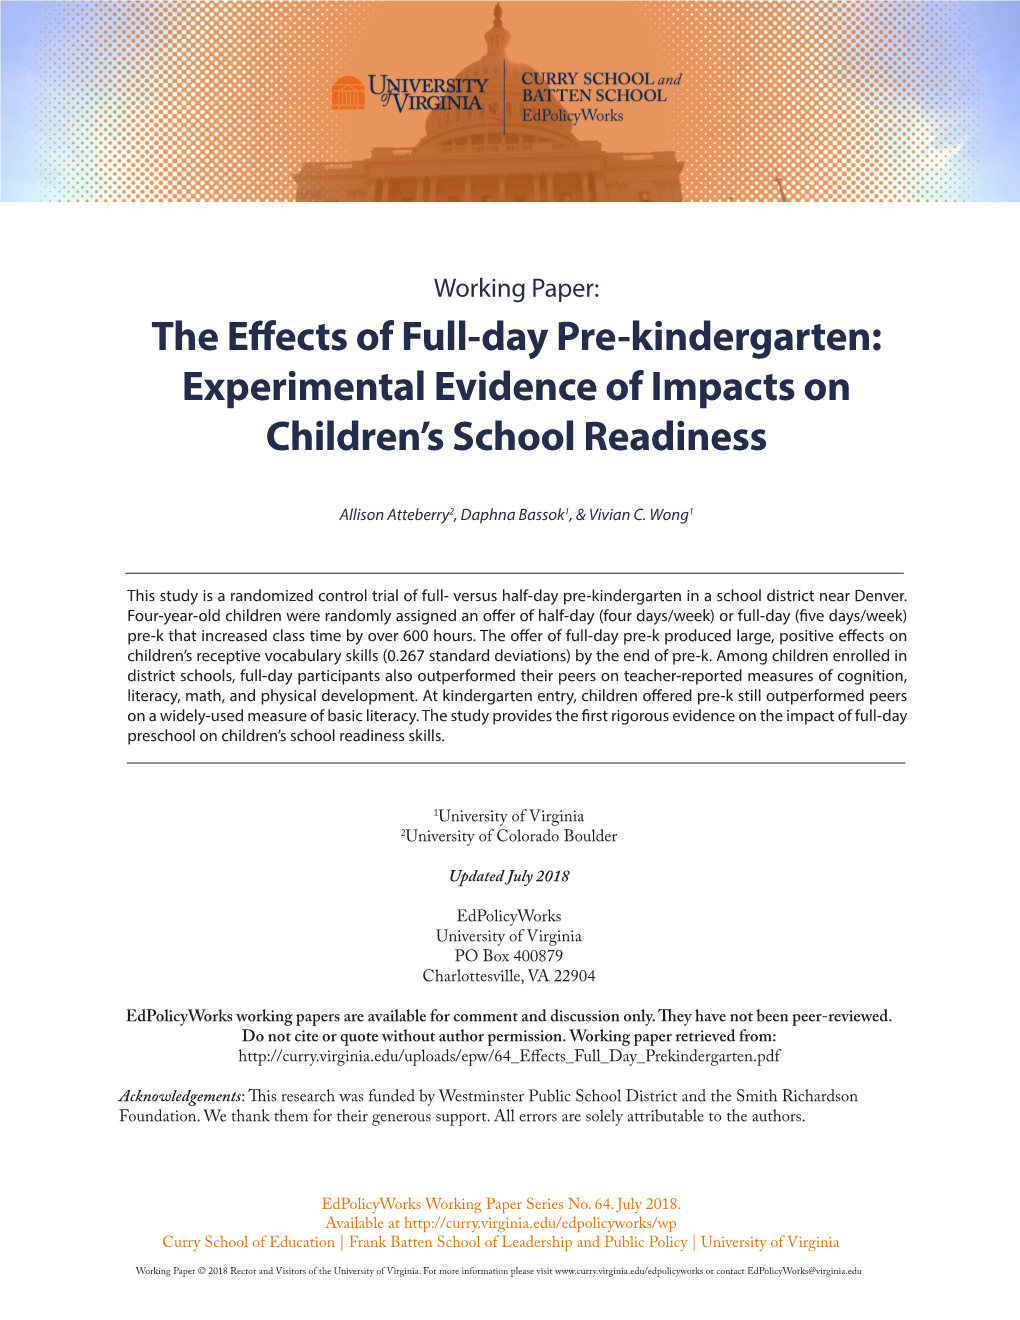 The Effects of Full-Day Pre-Kindergarten: Experimental Evidence of Impacts on Children’S School Readiness